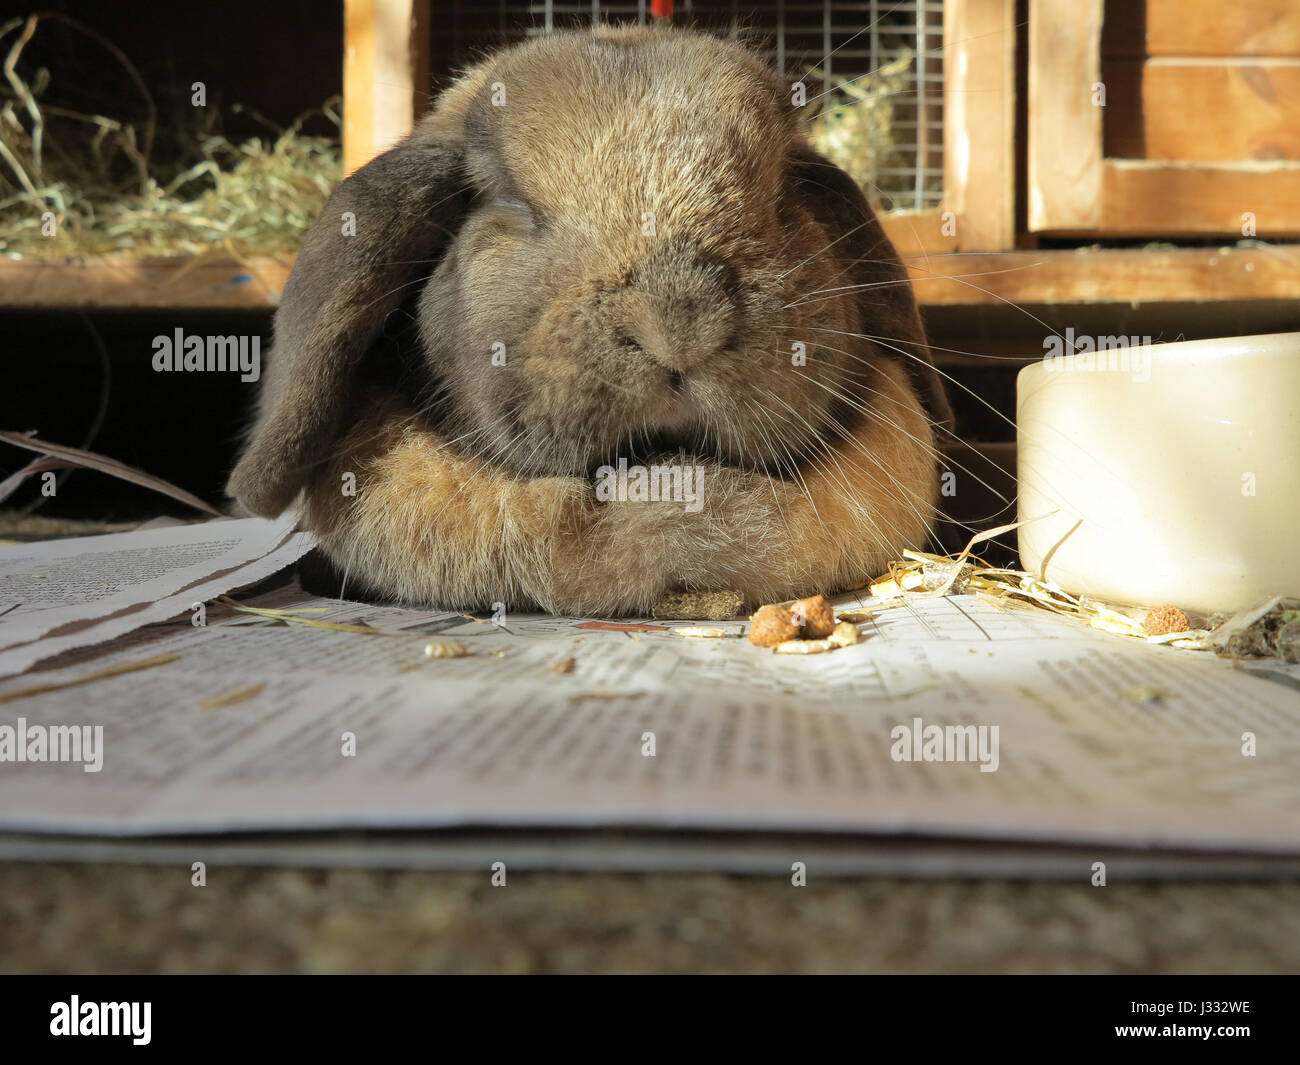 Low level shot of a large bunny rabbit (Oryctolagus cuniculus) with floppy ears sitting on newspaper outside his hutch Stock Photo